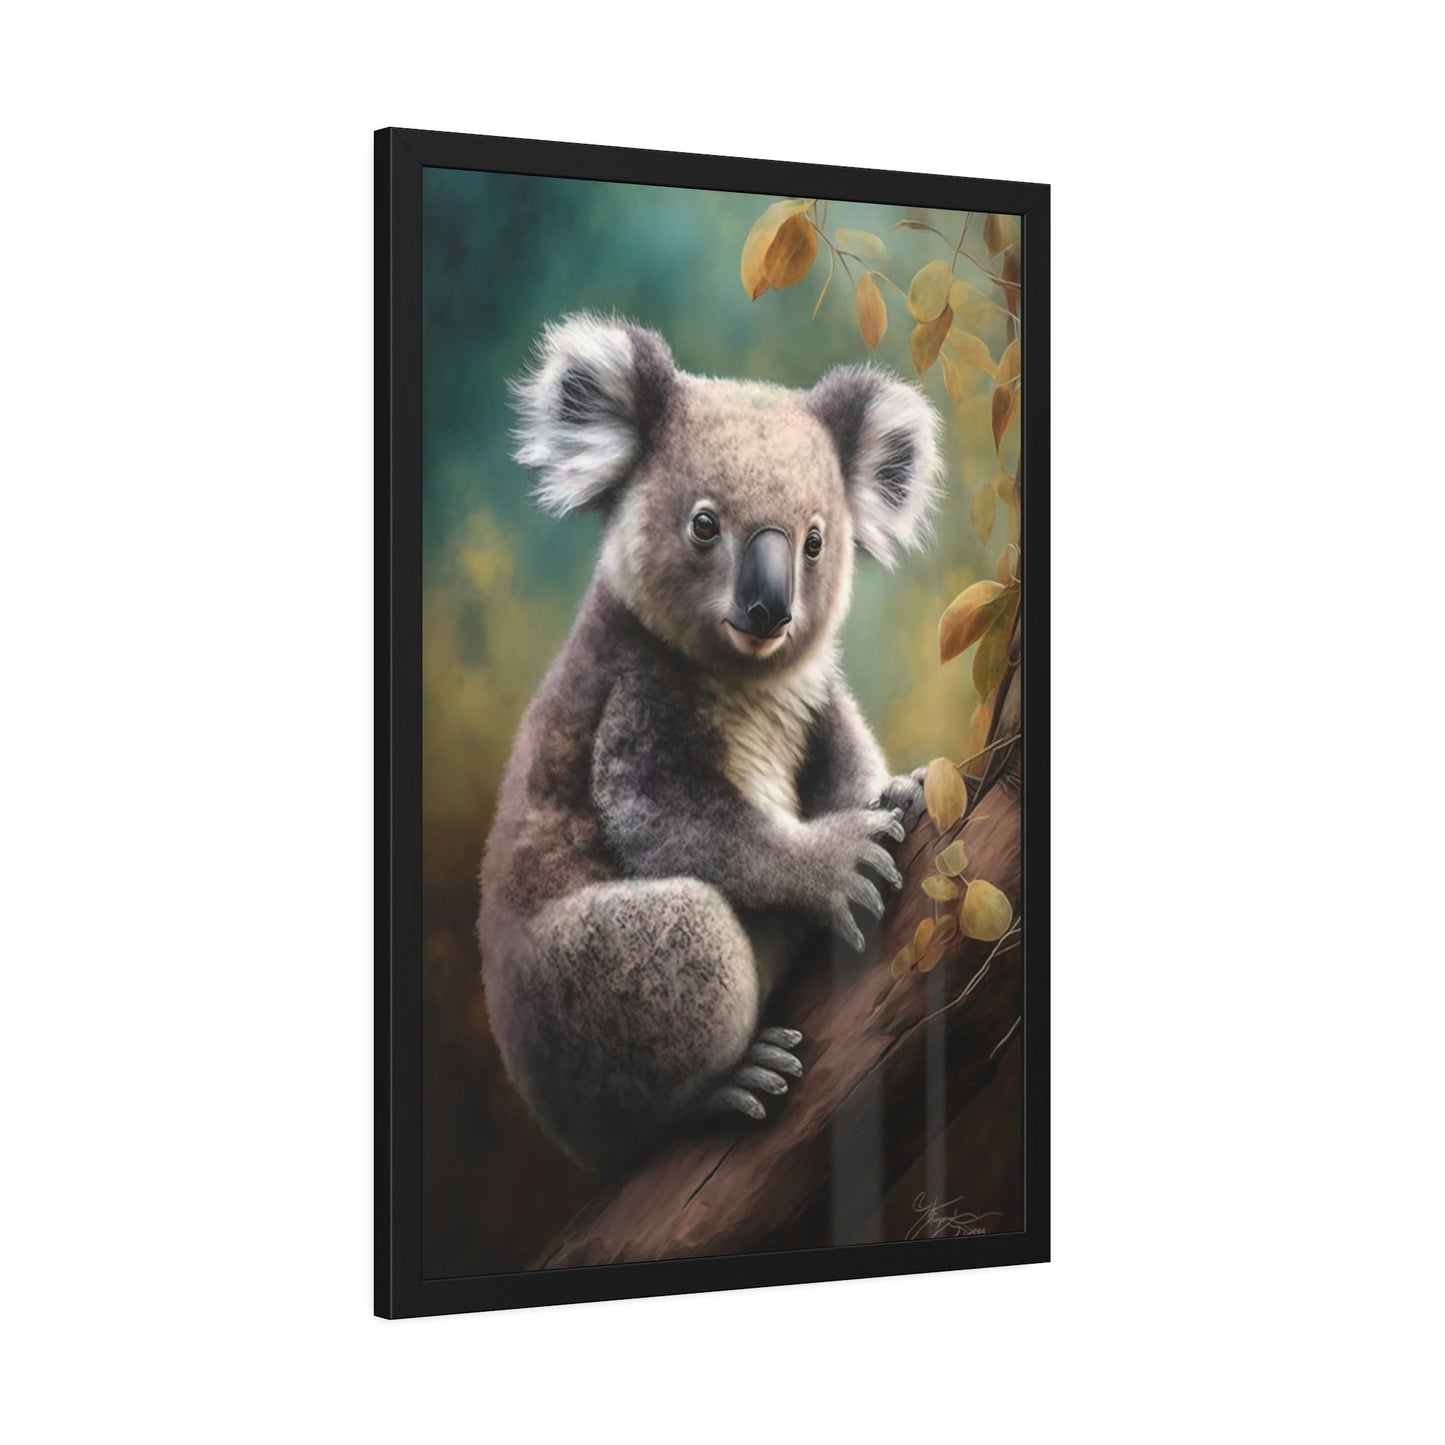 A Peaceful Moment in the Eucalyptus Forest: A Koala Painting on Canvas